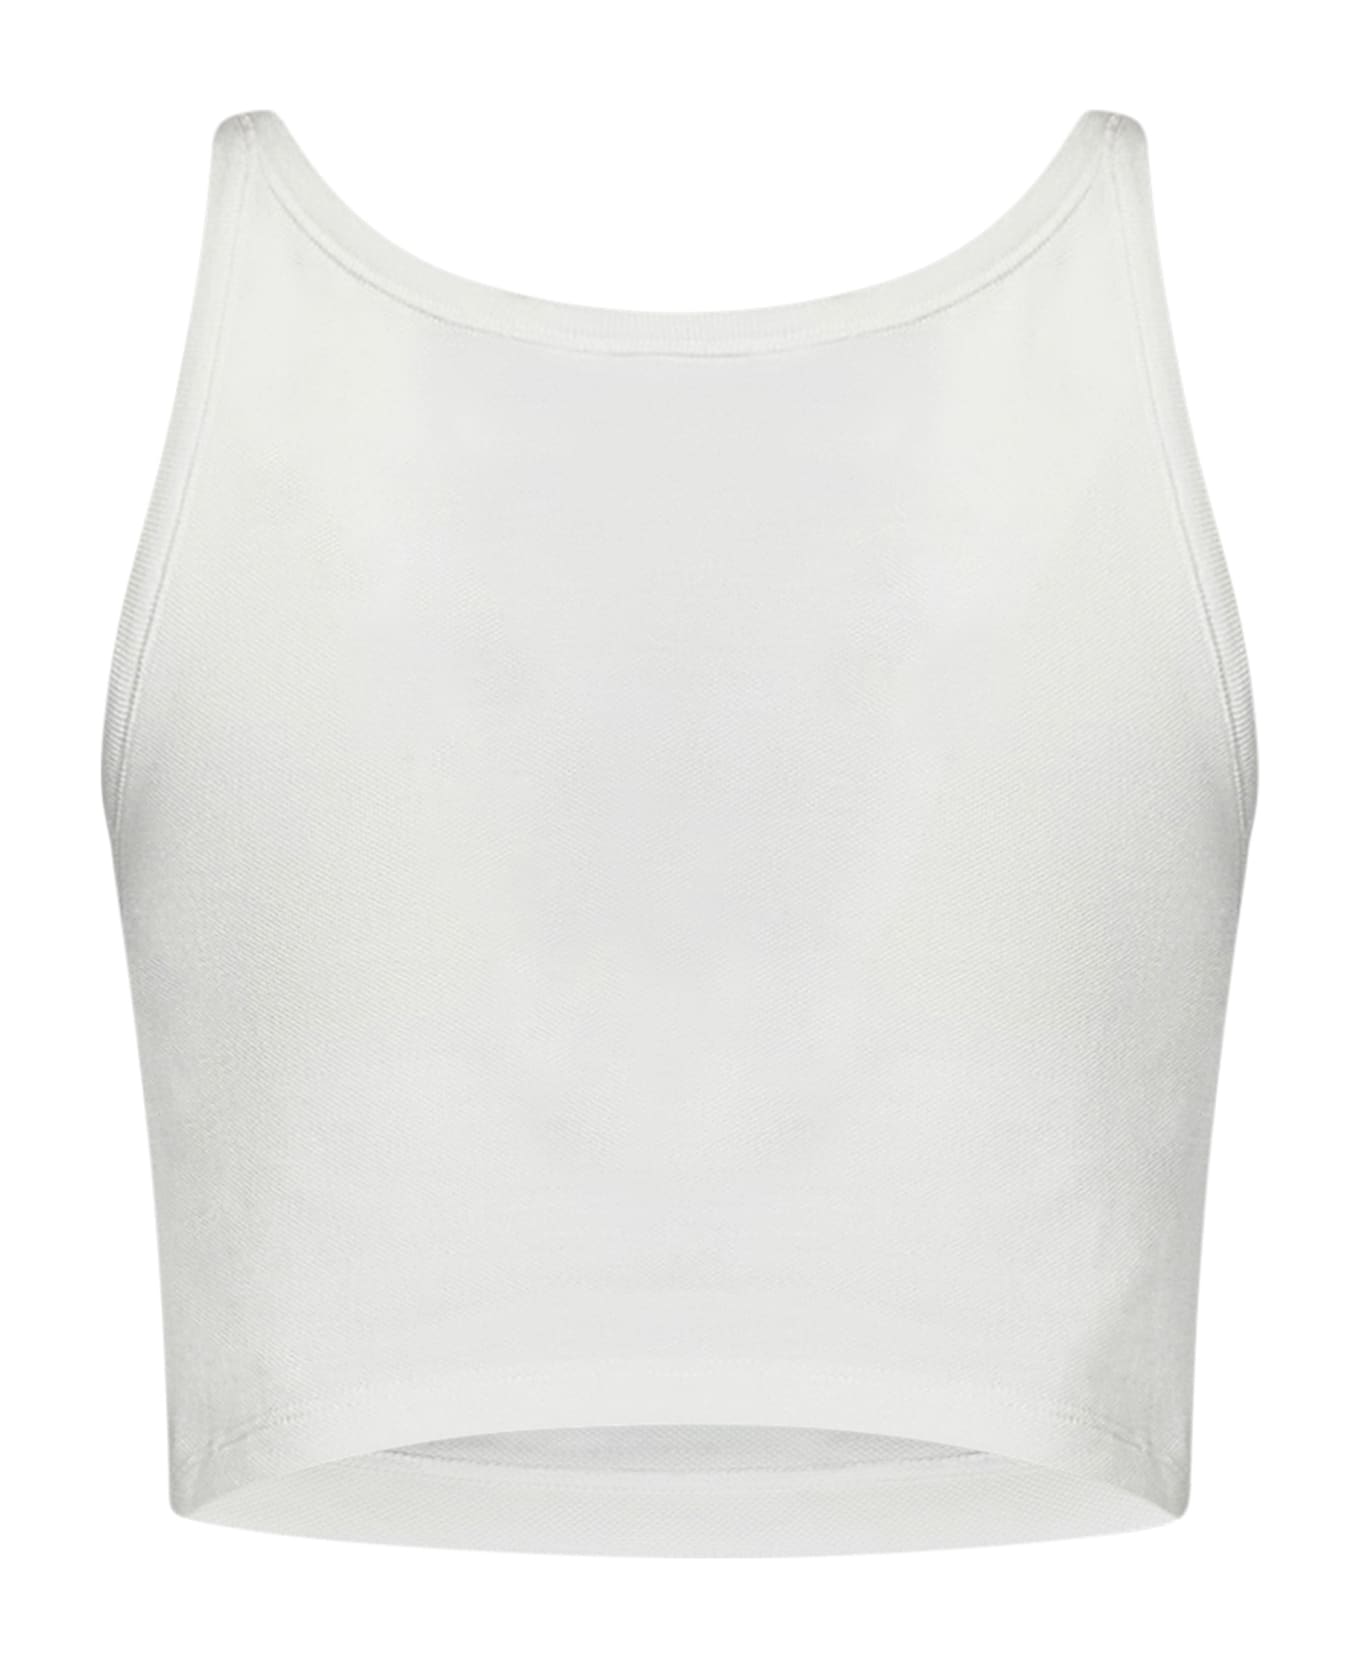 Palm Angels Classic Logo Top - White